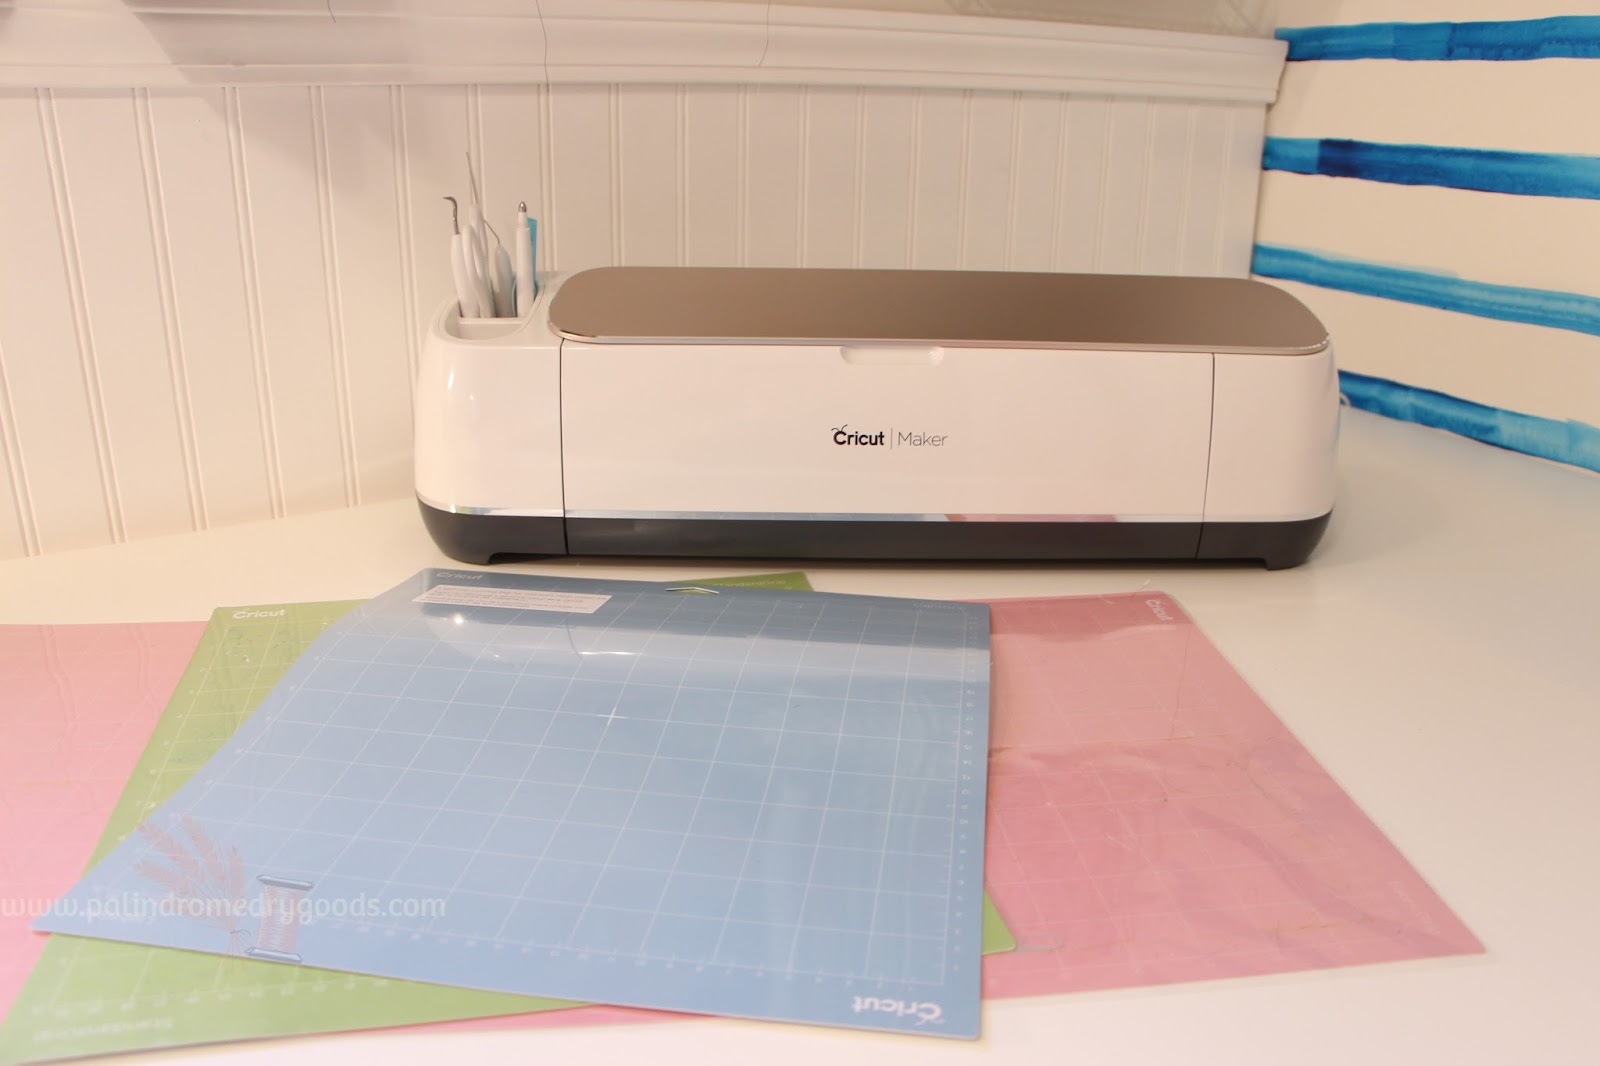 Using (and Loving!) the New Cricut Maker - The Ultimate Smart Cutting Machi...